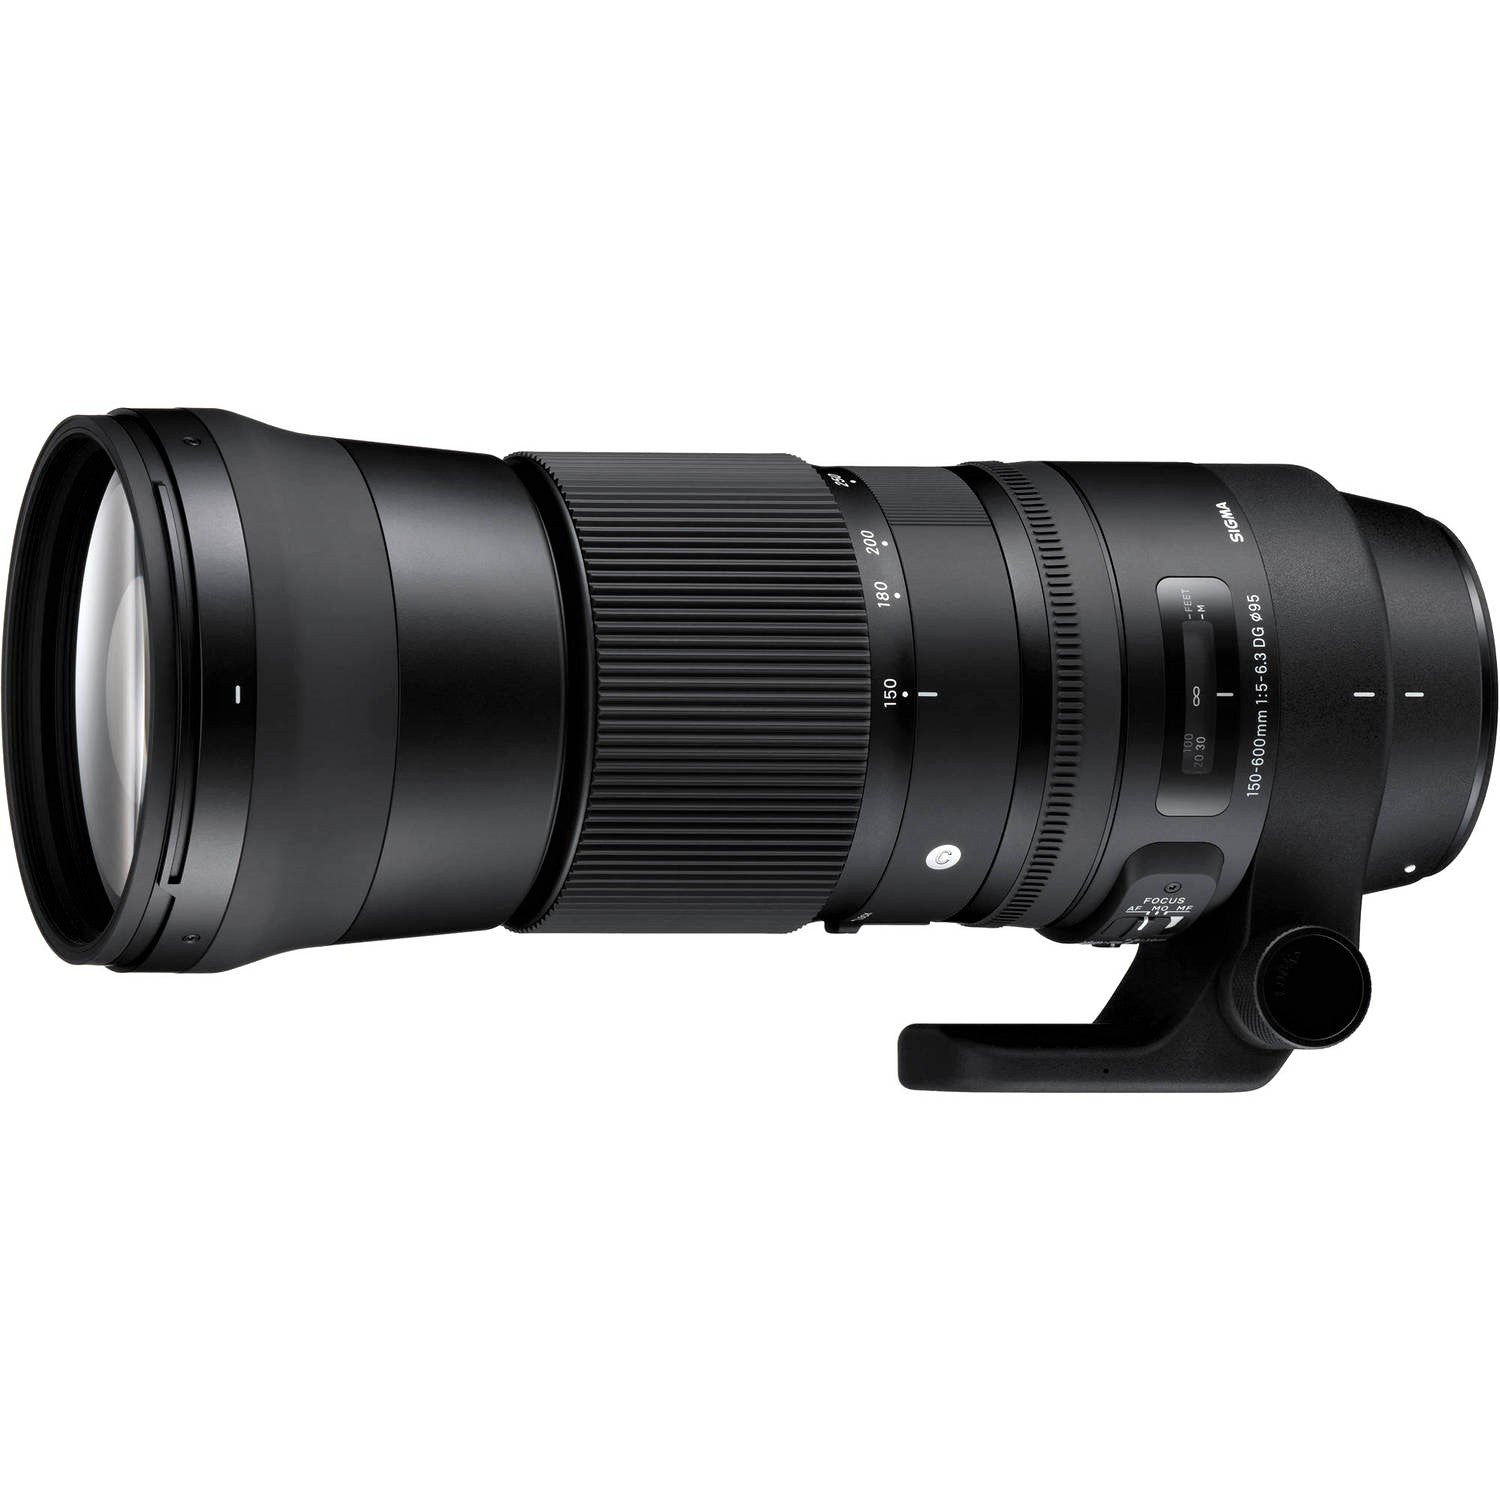 Sigma 150-600mm F5-6.3 DG OS HSM Contemporary Lens for Sigma SA with Attached Lens Hood on the Left